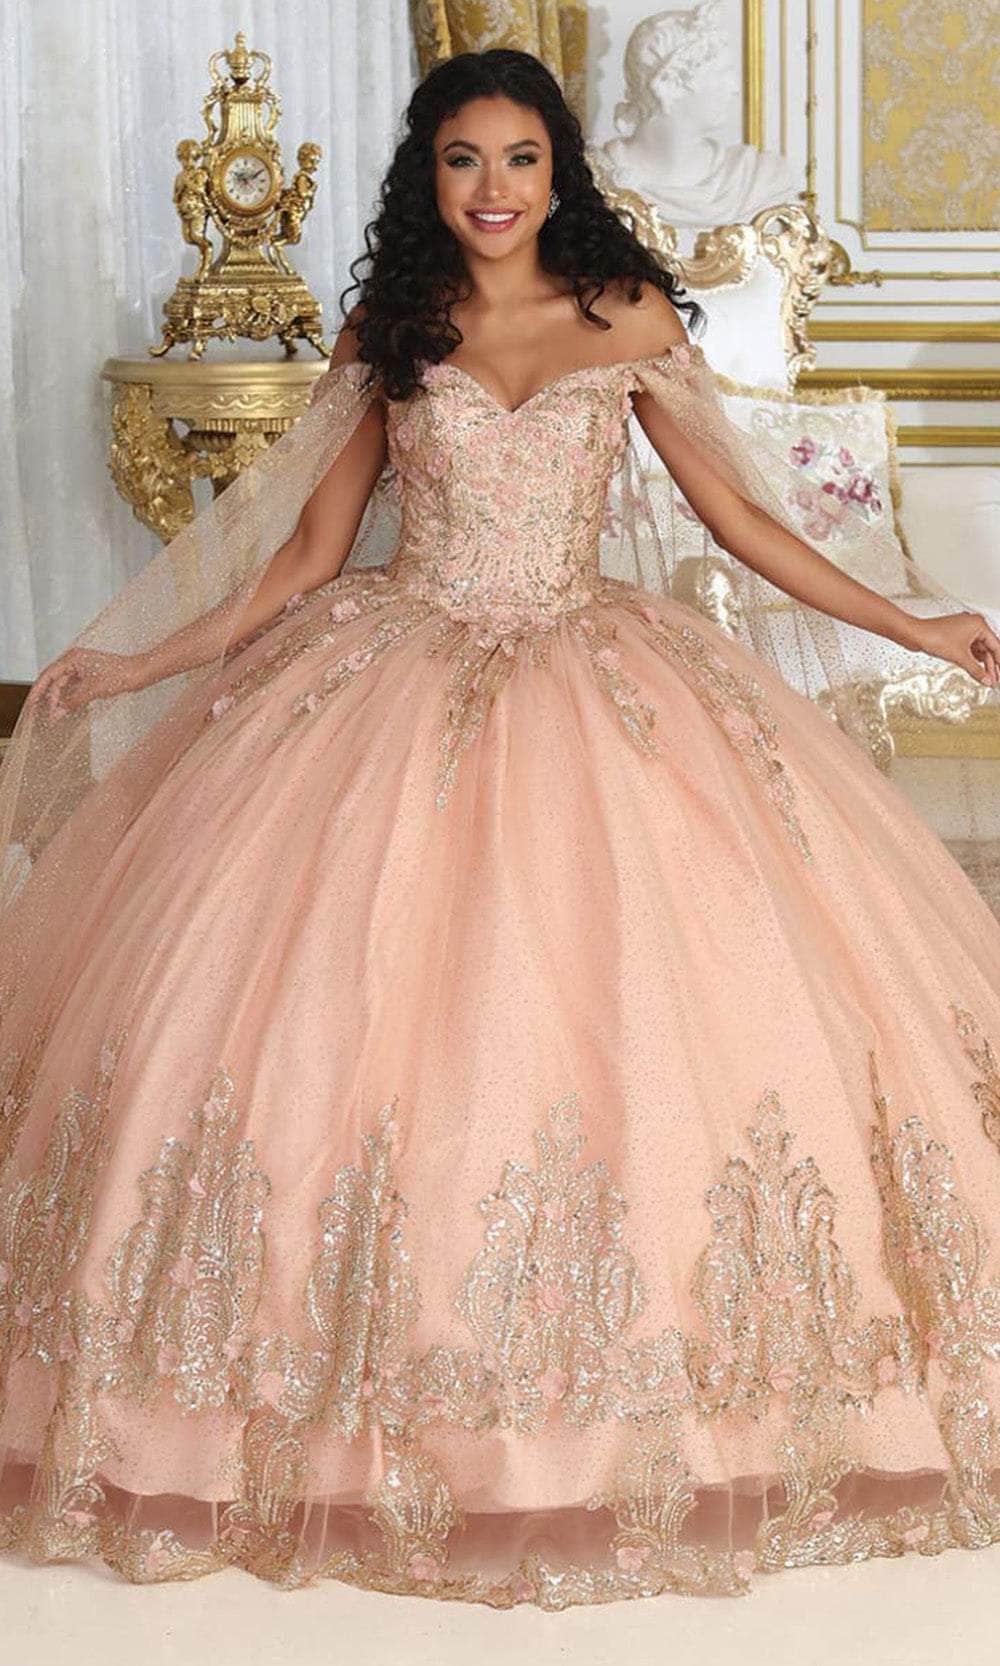 May Queen LK211 - Cape Sleeve Floral Ballgown Quinceanera Dresses 2 / Rose Gold